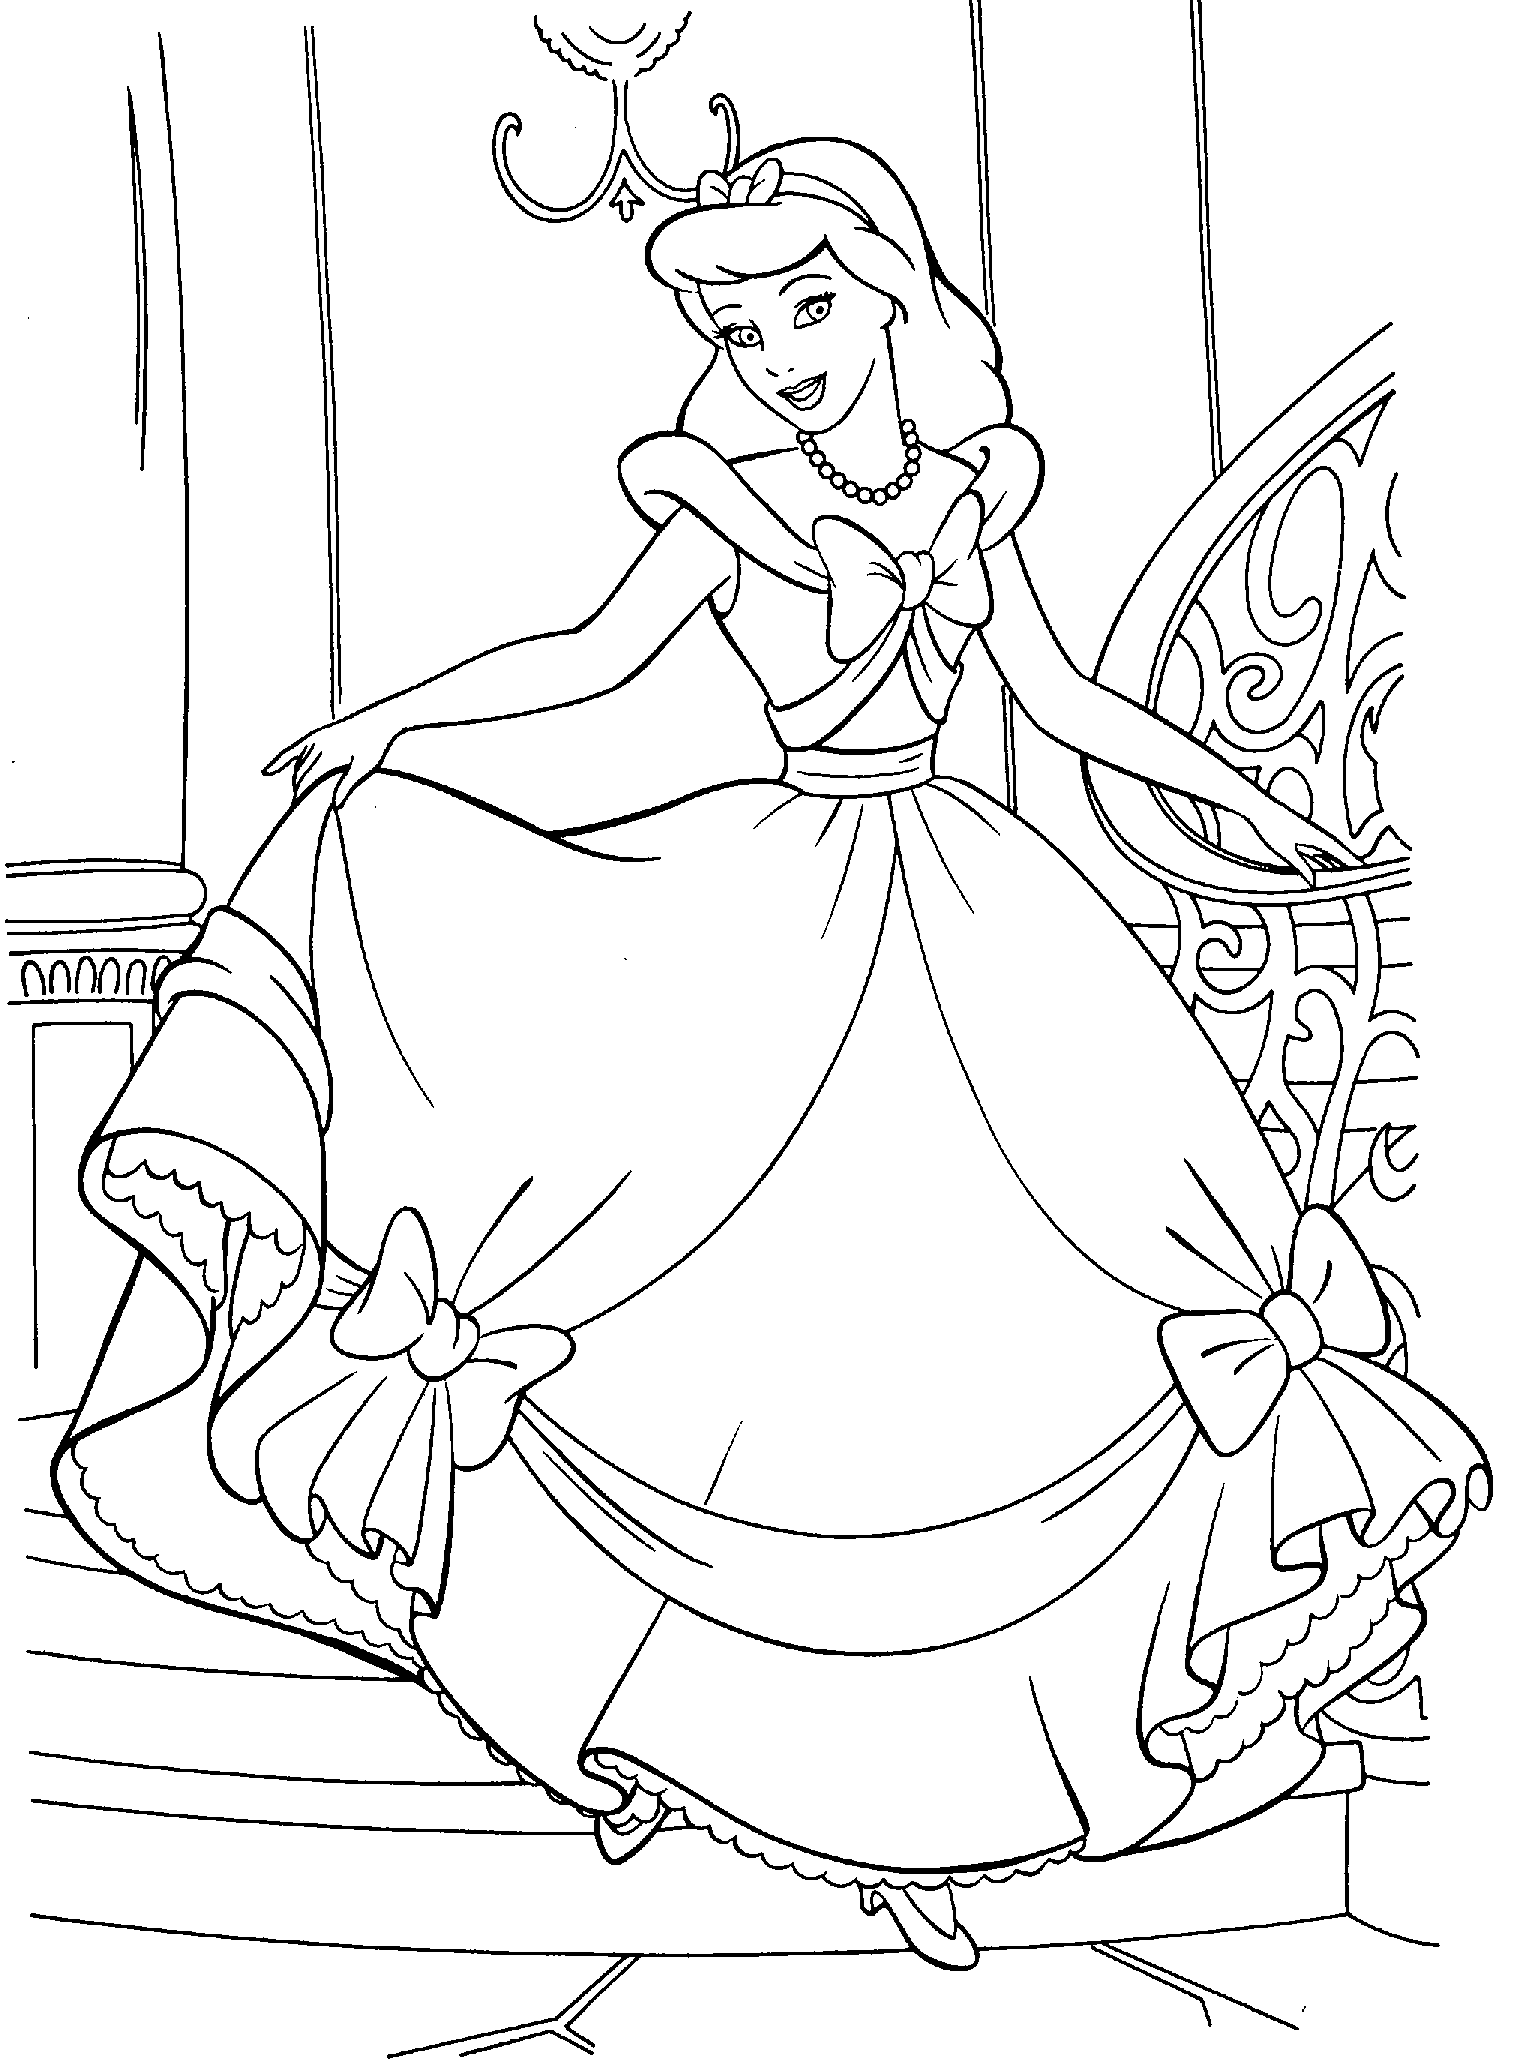 online coloring pages disney for free free printable minnie mouse coloring pages for kids for pages free coloring disney online 